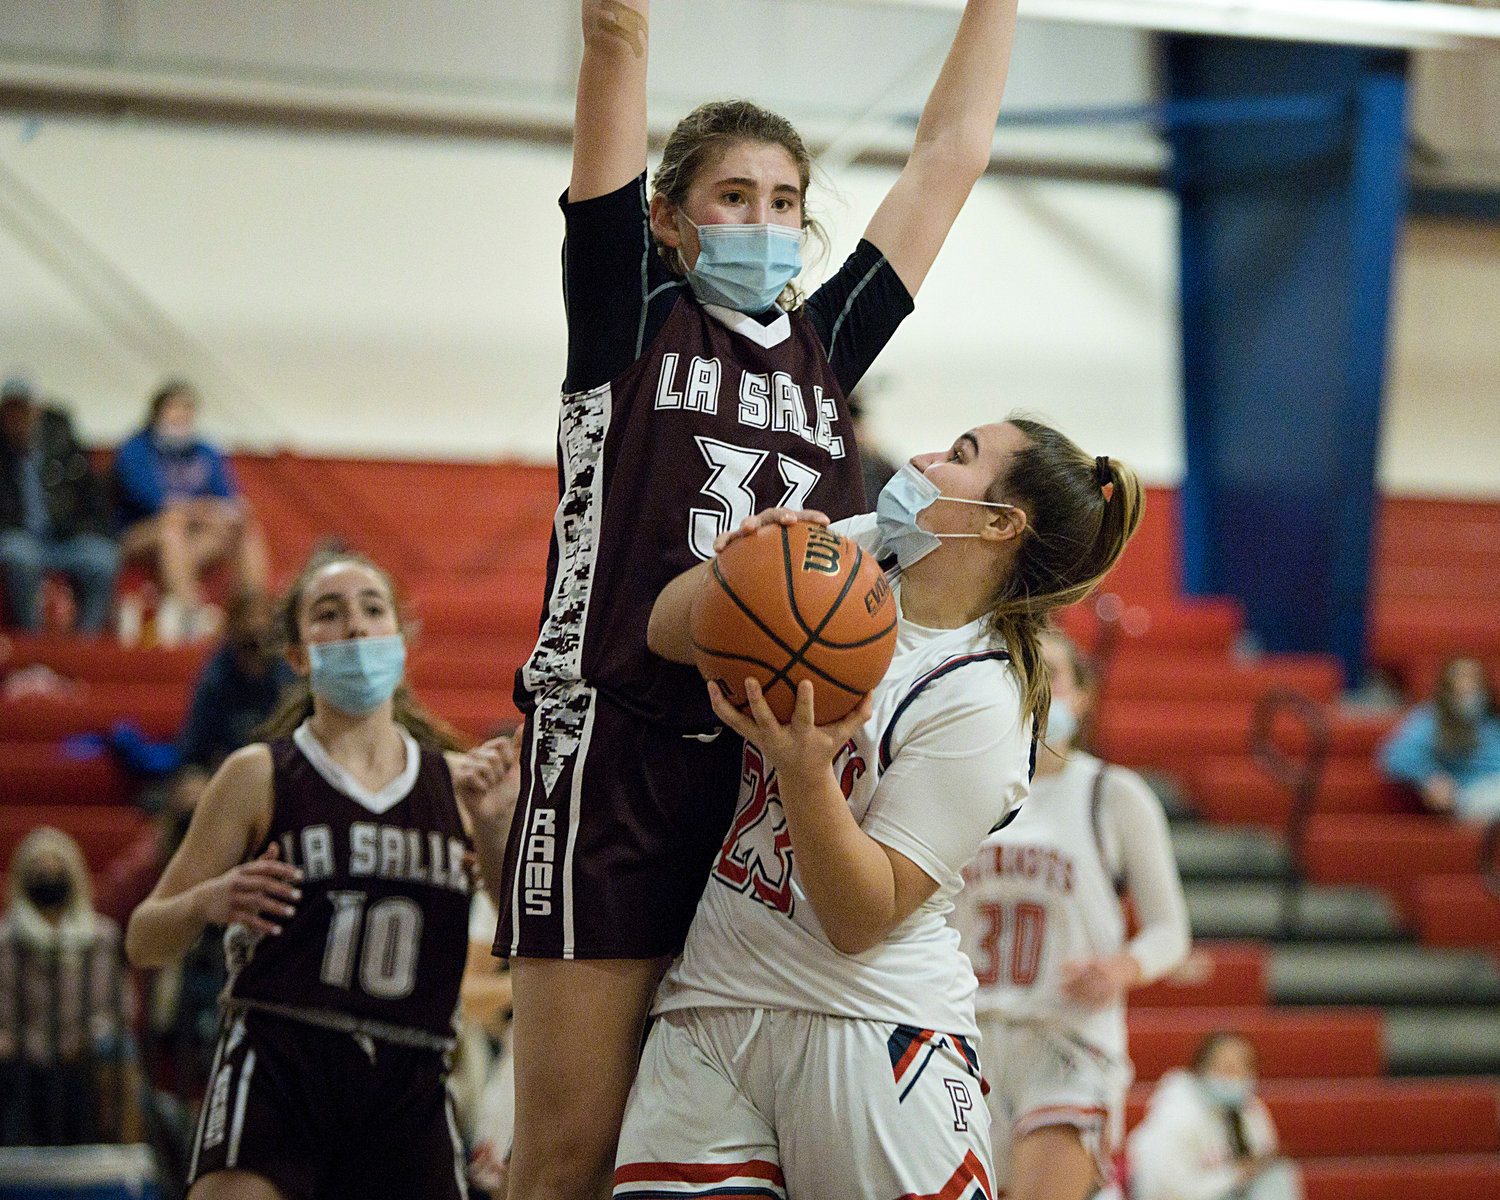 Emily Maito eyes the basket as a La Salle defender towers over her.